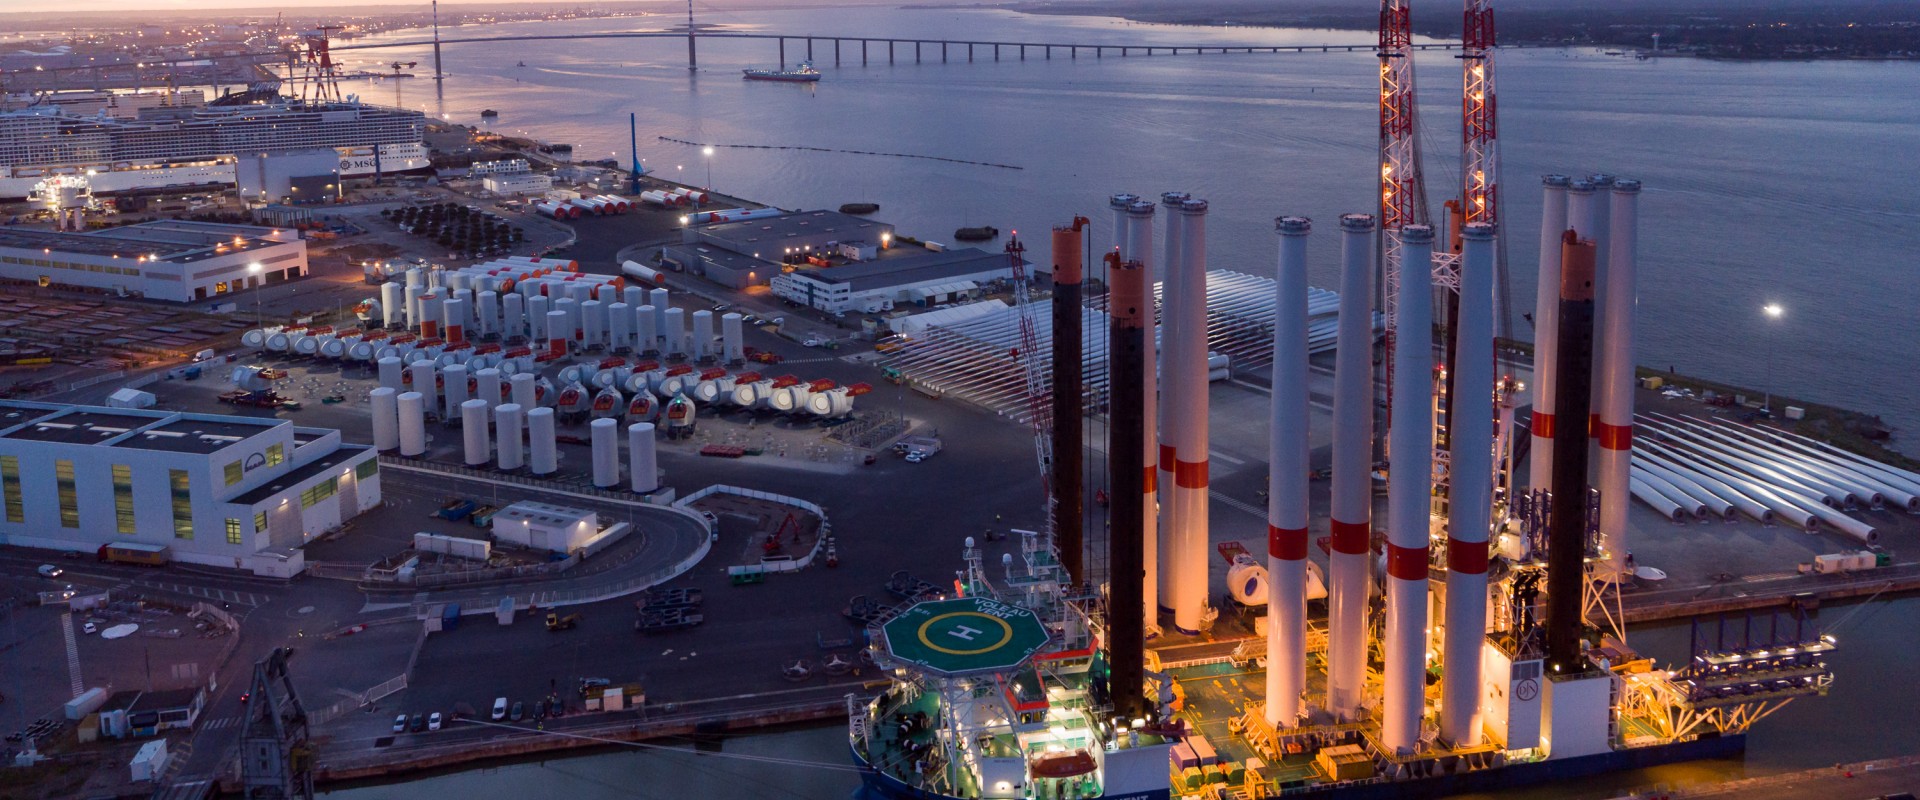 The Saint Nazaire Port Facility is Chosen for the Installation of the Îles d’Yeu and Noirmoutier Offshore Wind Farm